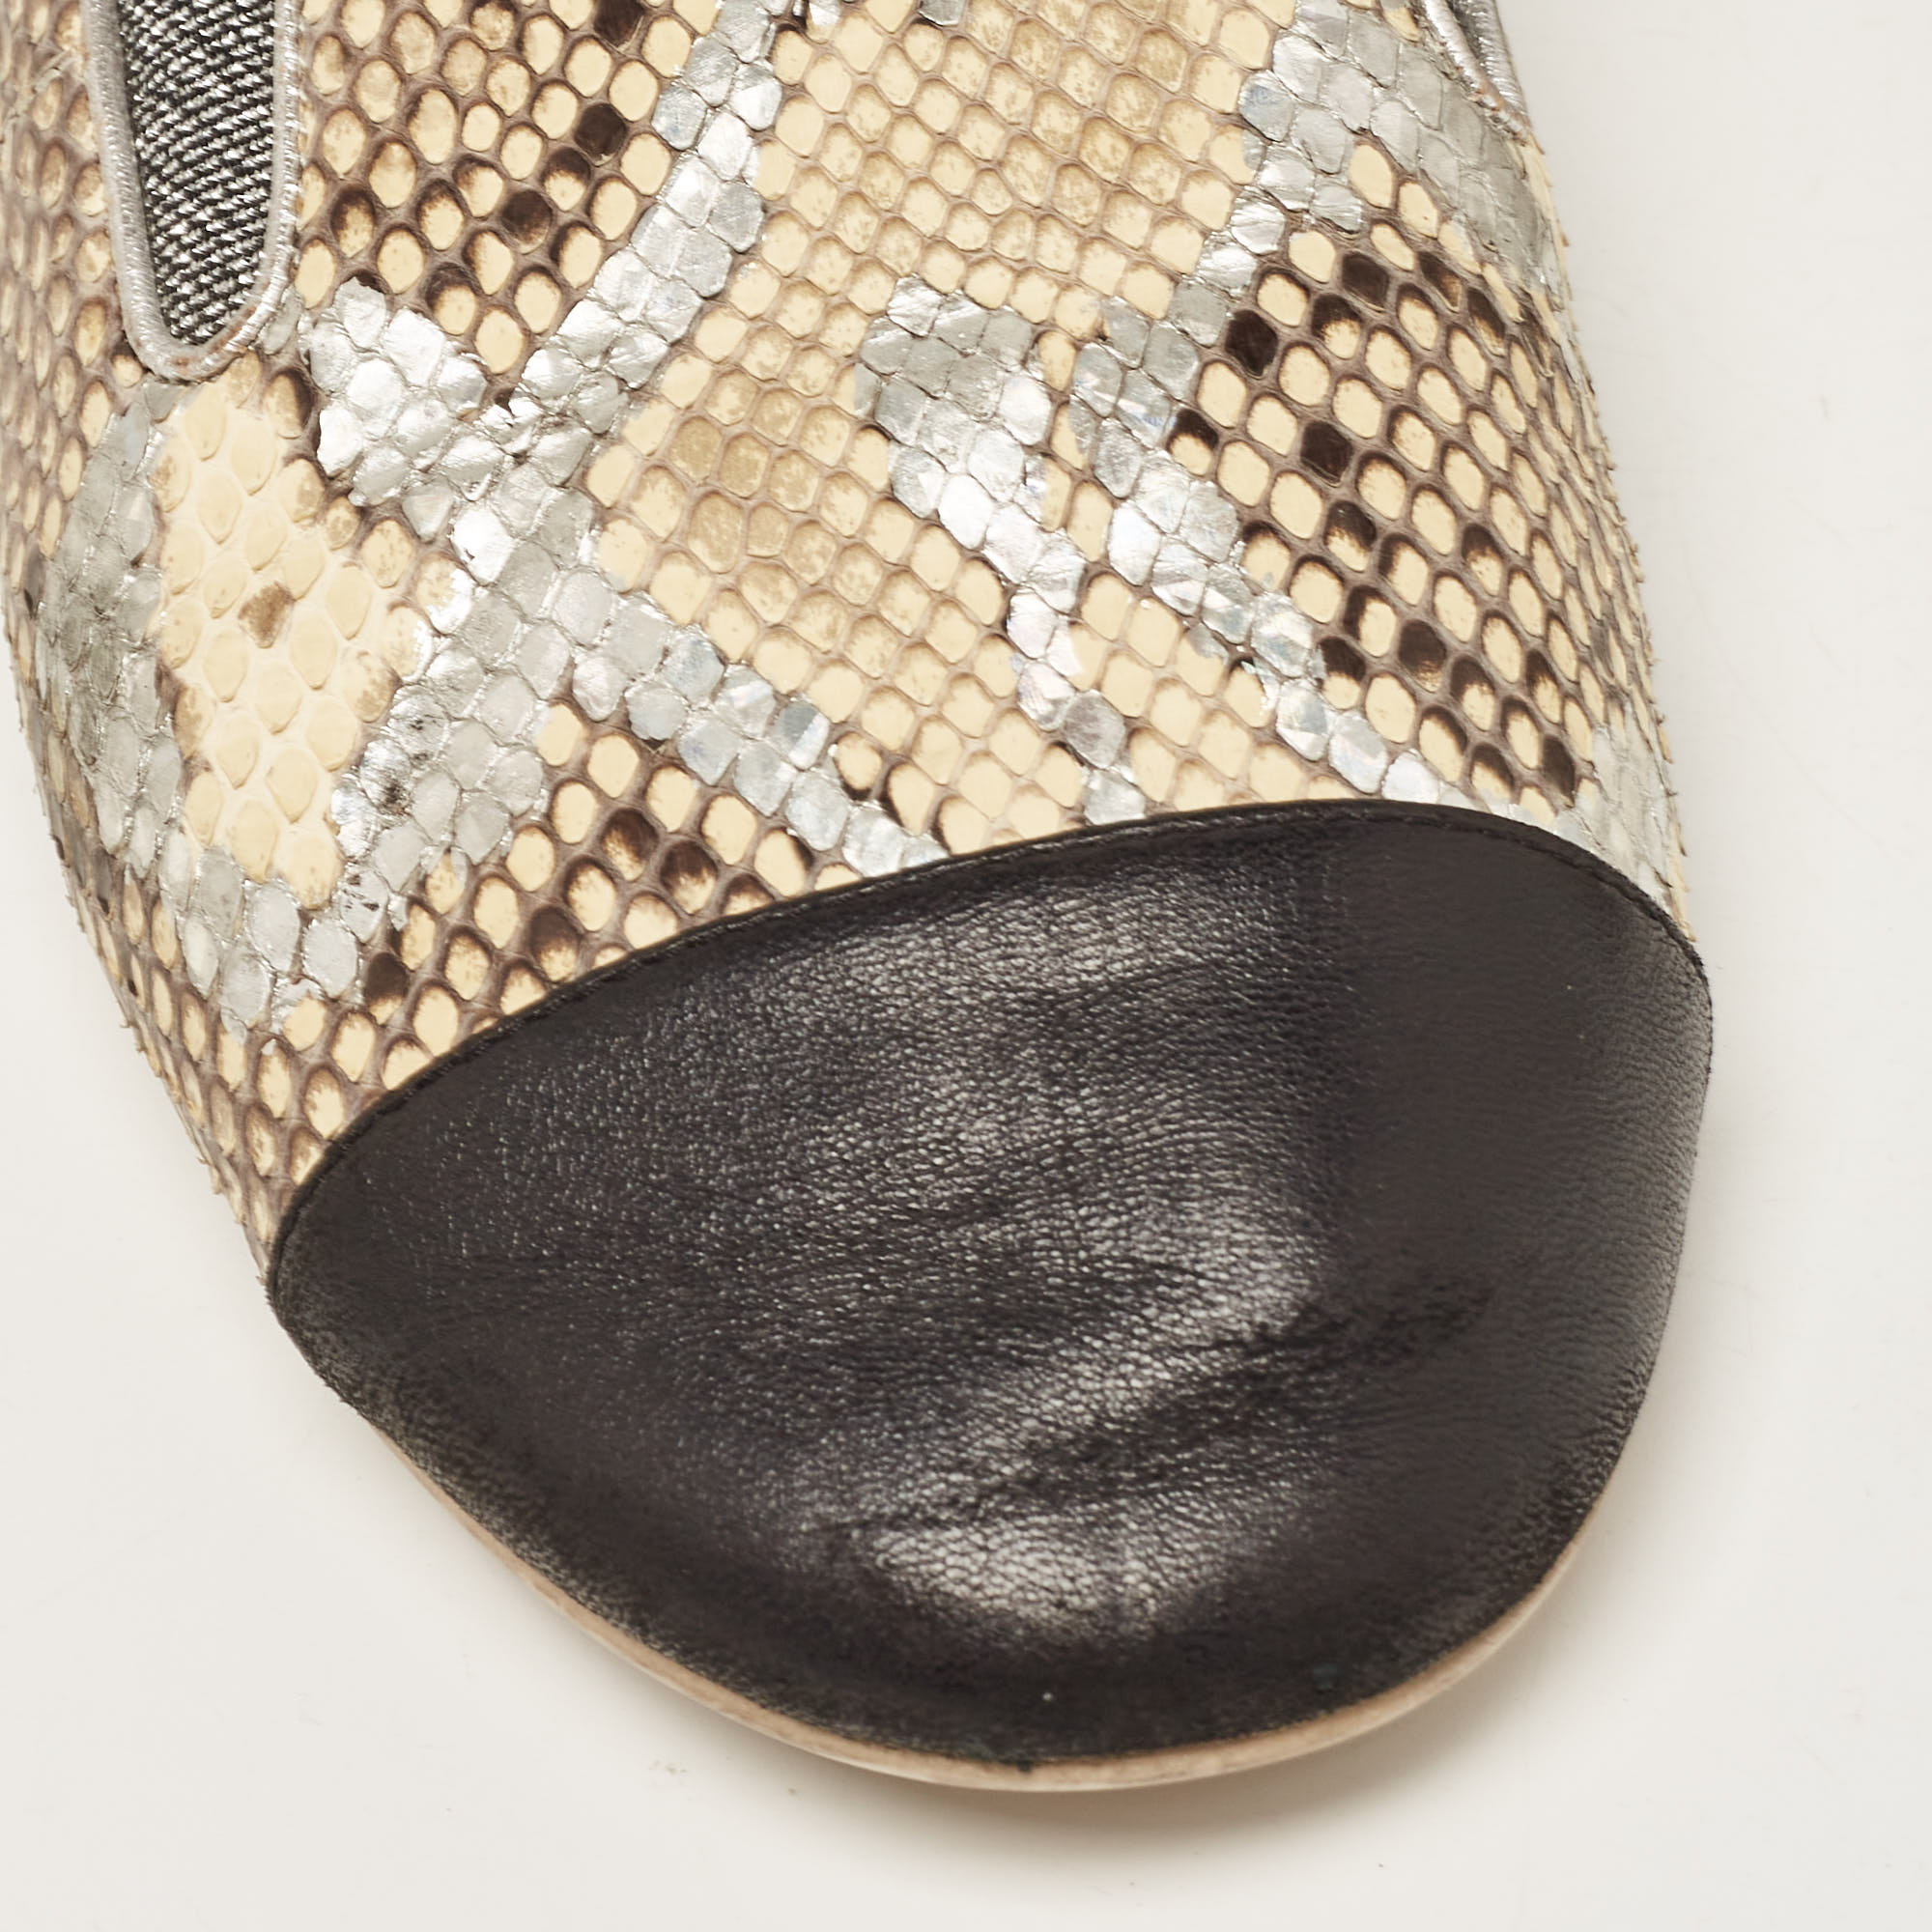 Chanel Tricolor Snakeskin And Leather Cap Toe CC Smoking Slippers Size 41